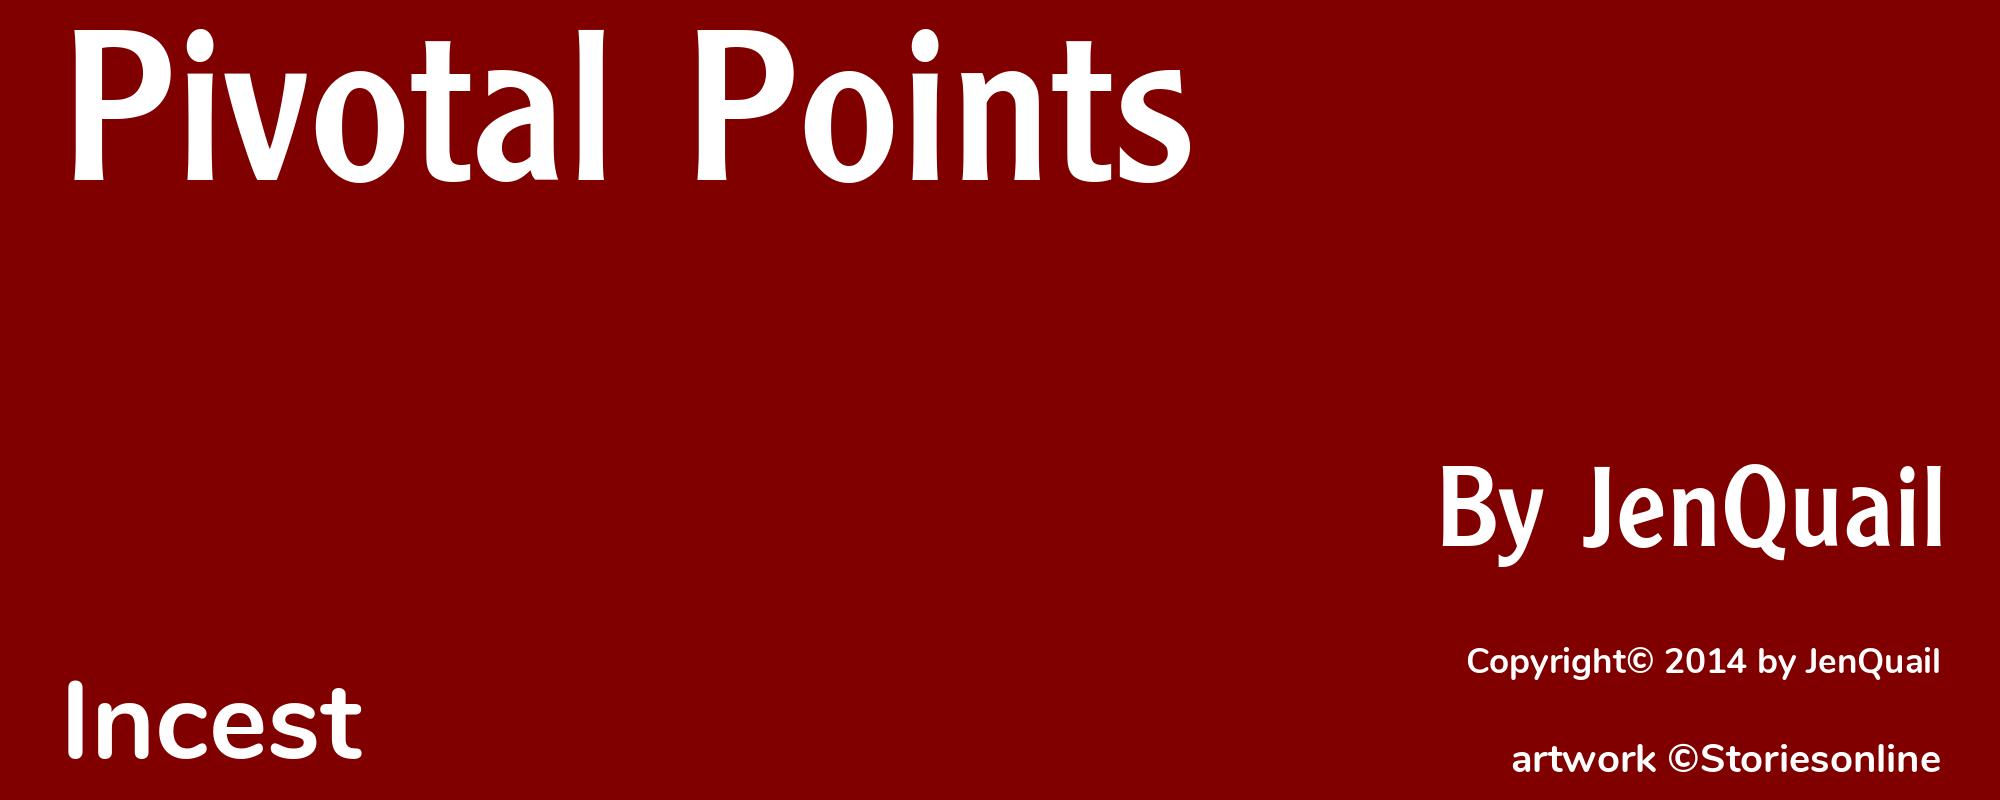 Pivotal Points - Cover